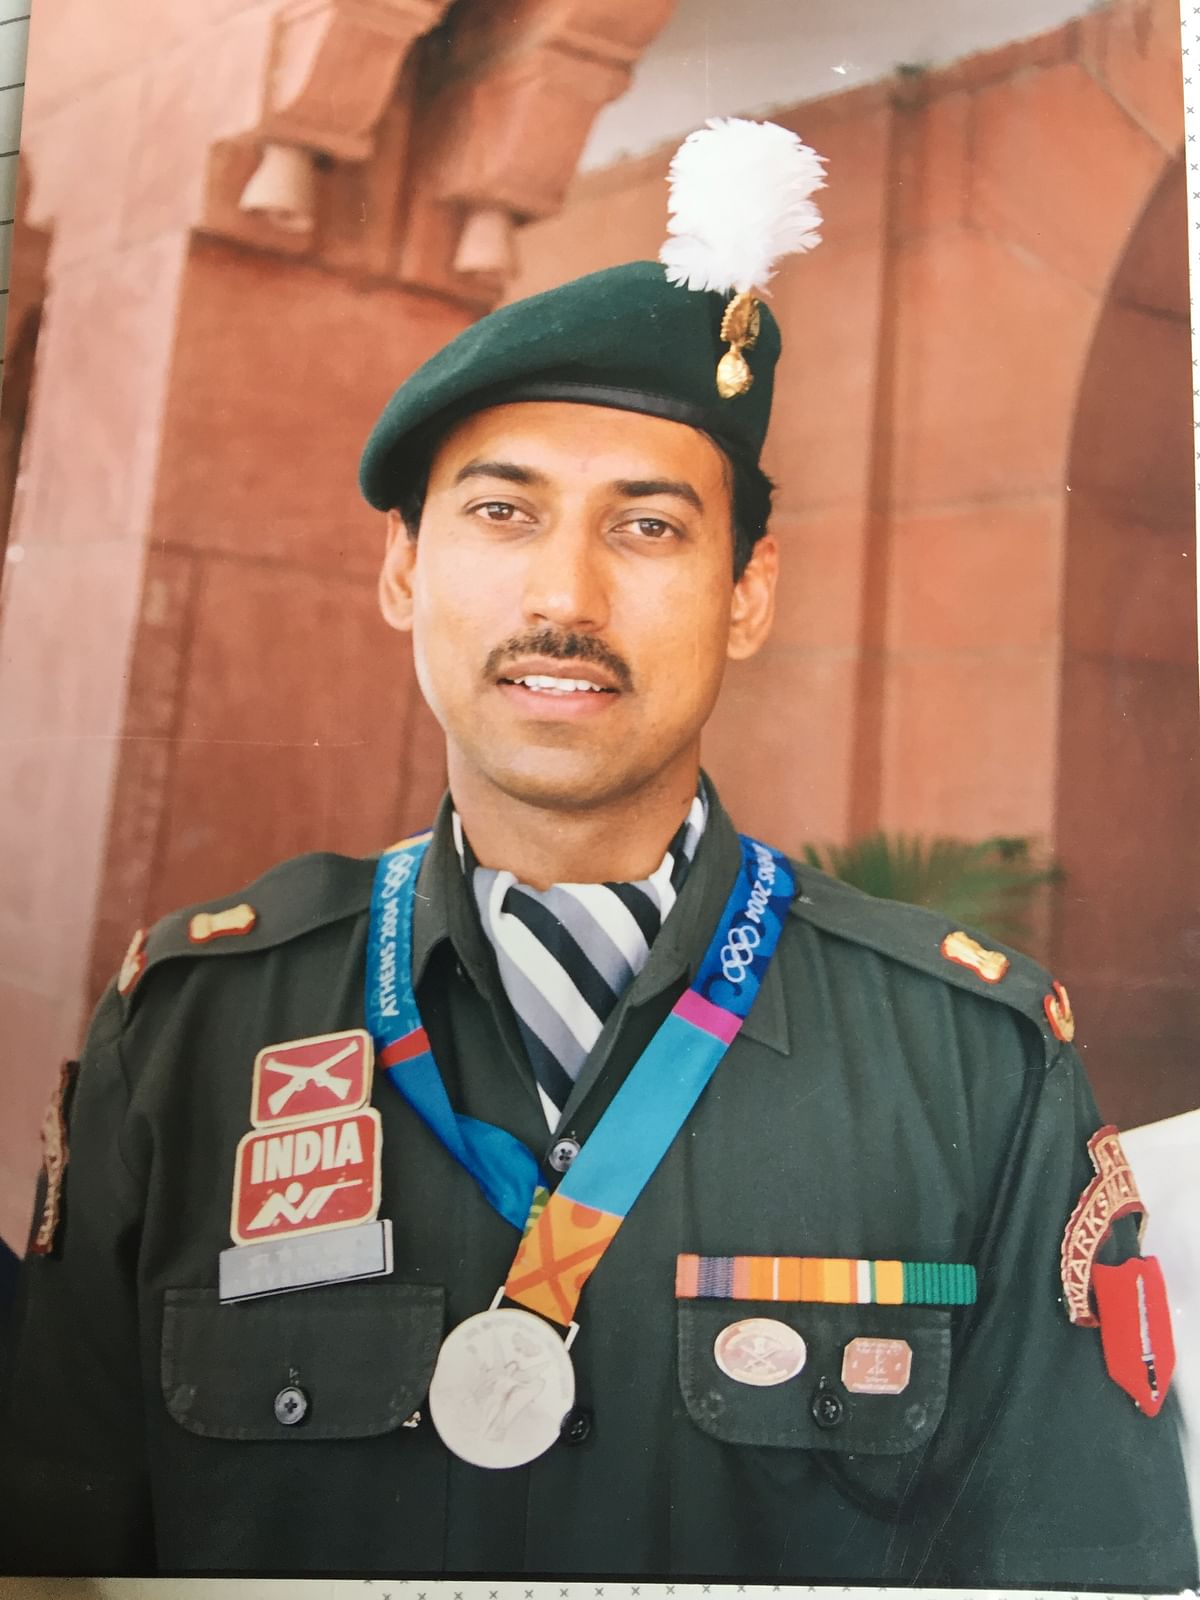 “You can be an Olympic medalist, but at home you are just a dad,” says Sports Minister Rajyavardhan Singh Rathore.